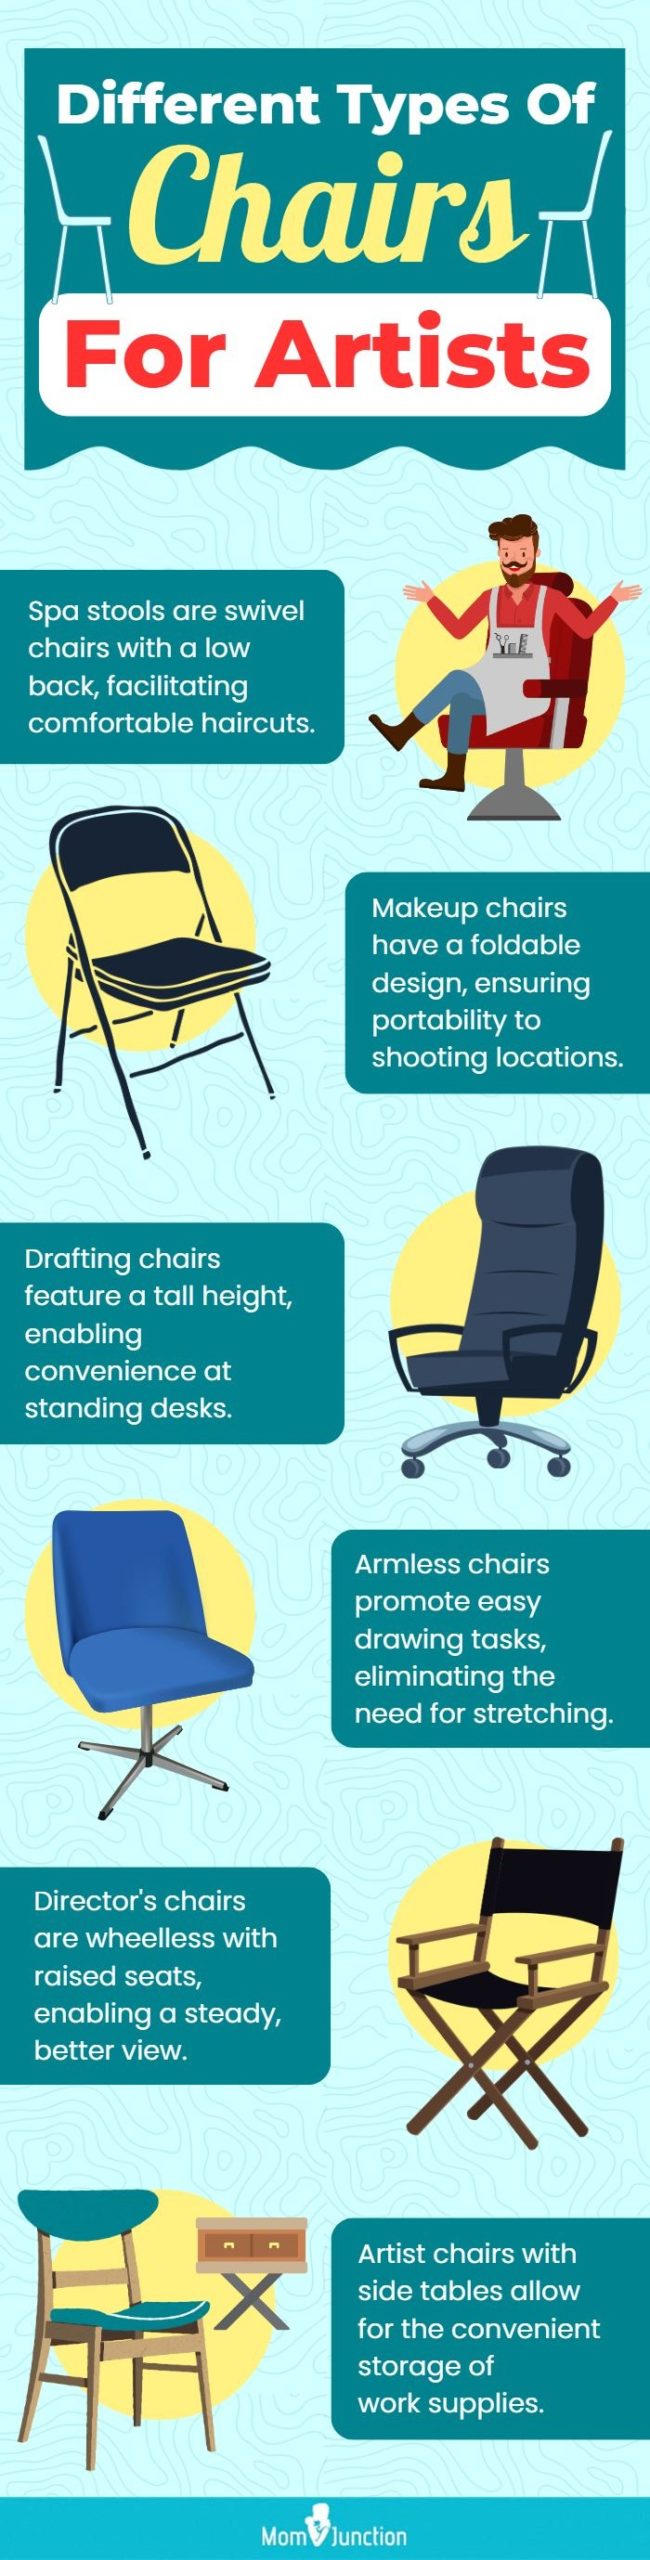 Different Types Of Chairs For Artists (infographic)